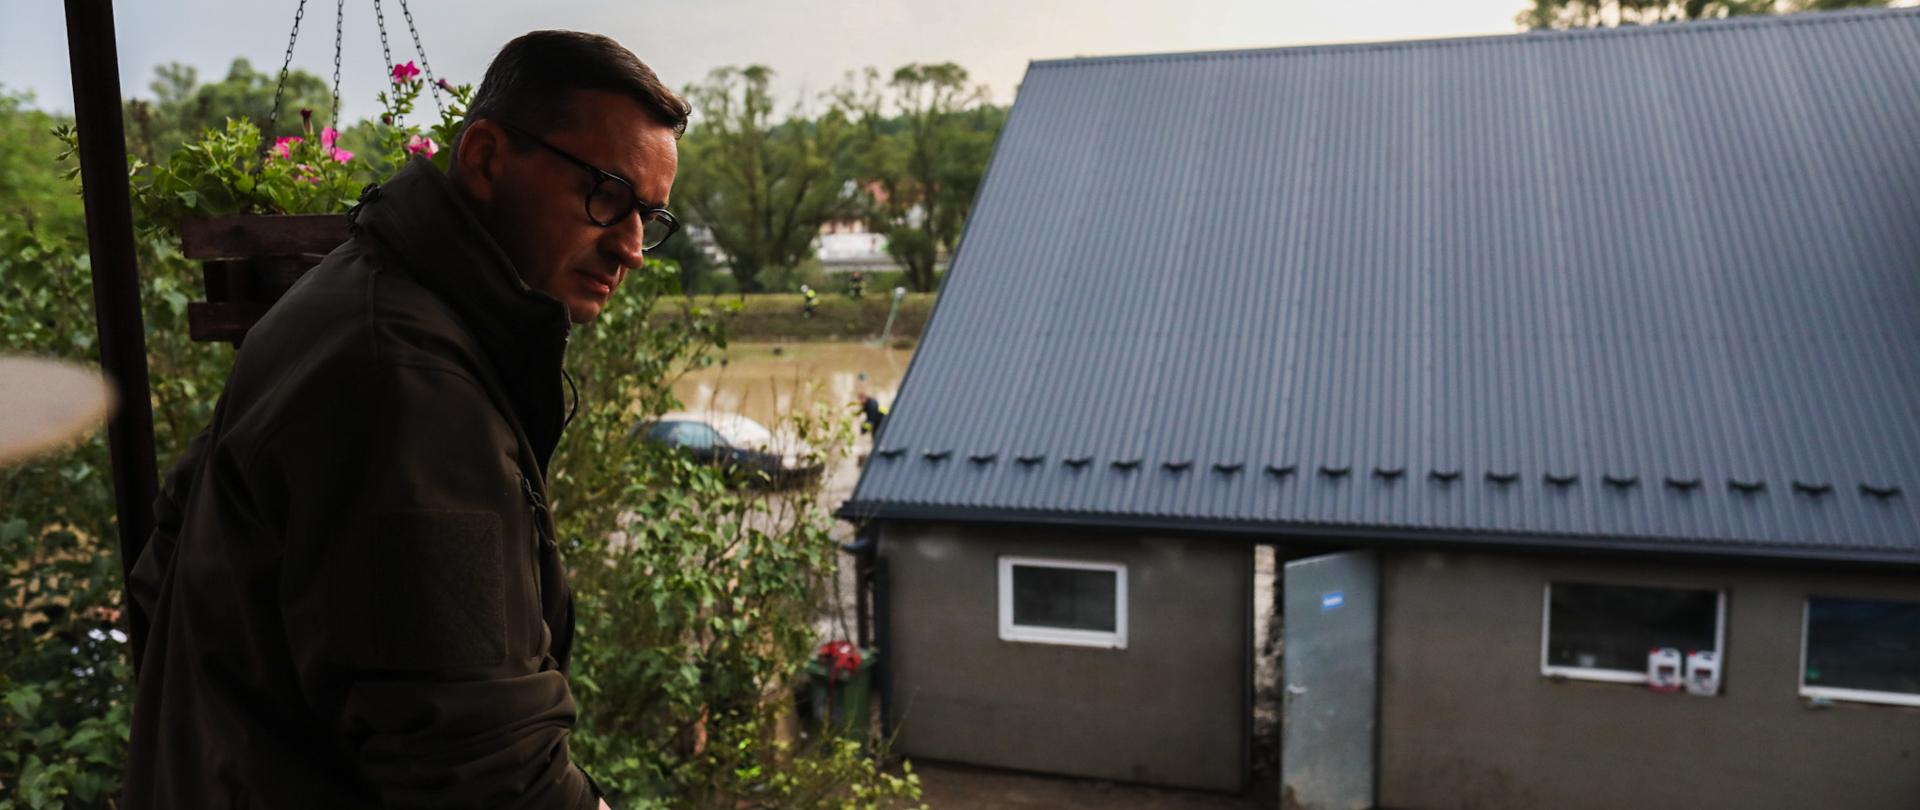 Prime Minister Mateusz Morawiecki on the areas affected by the flood